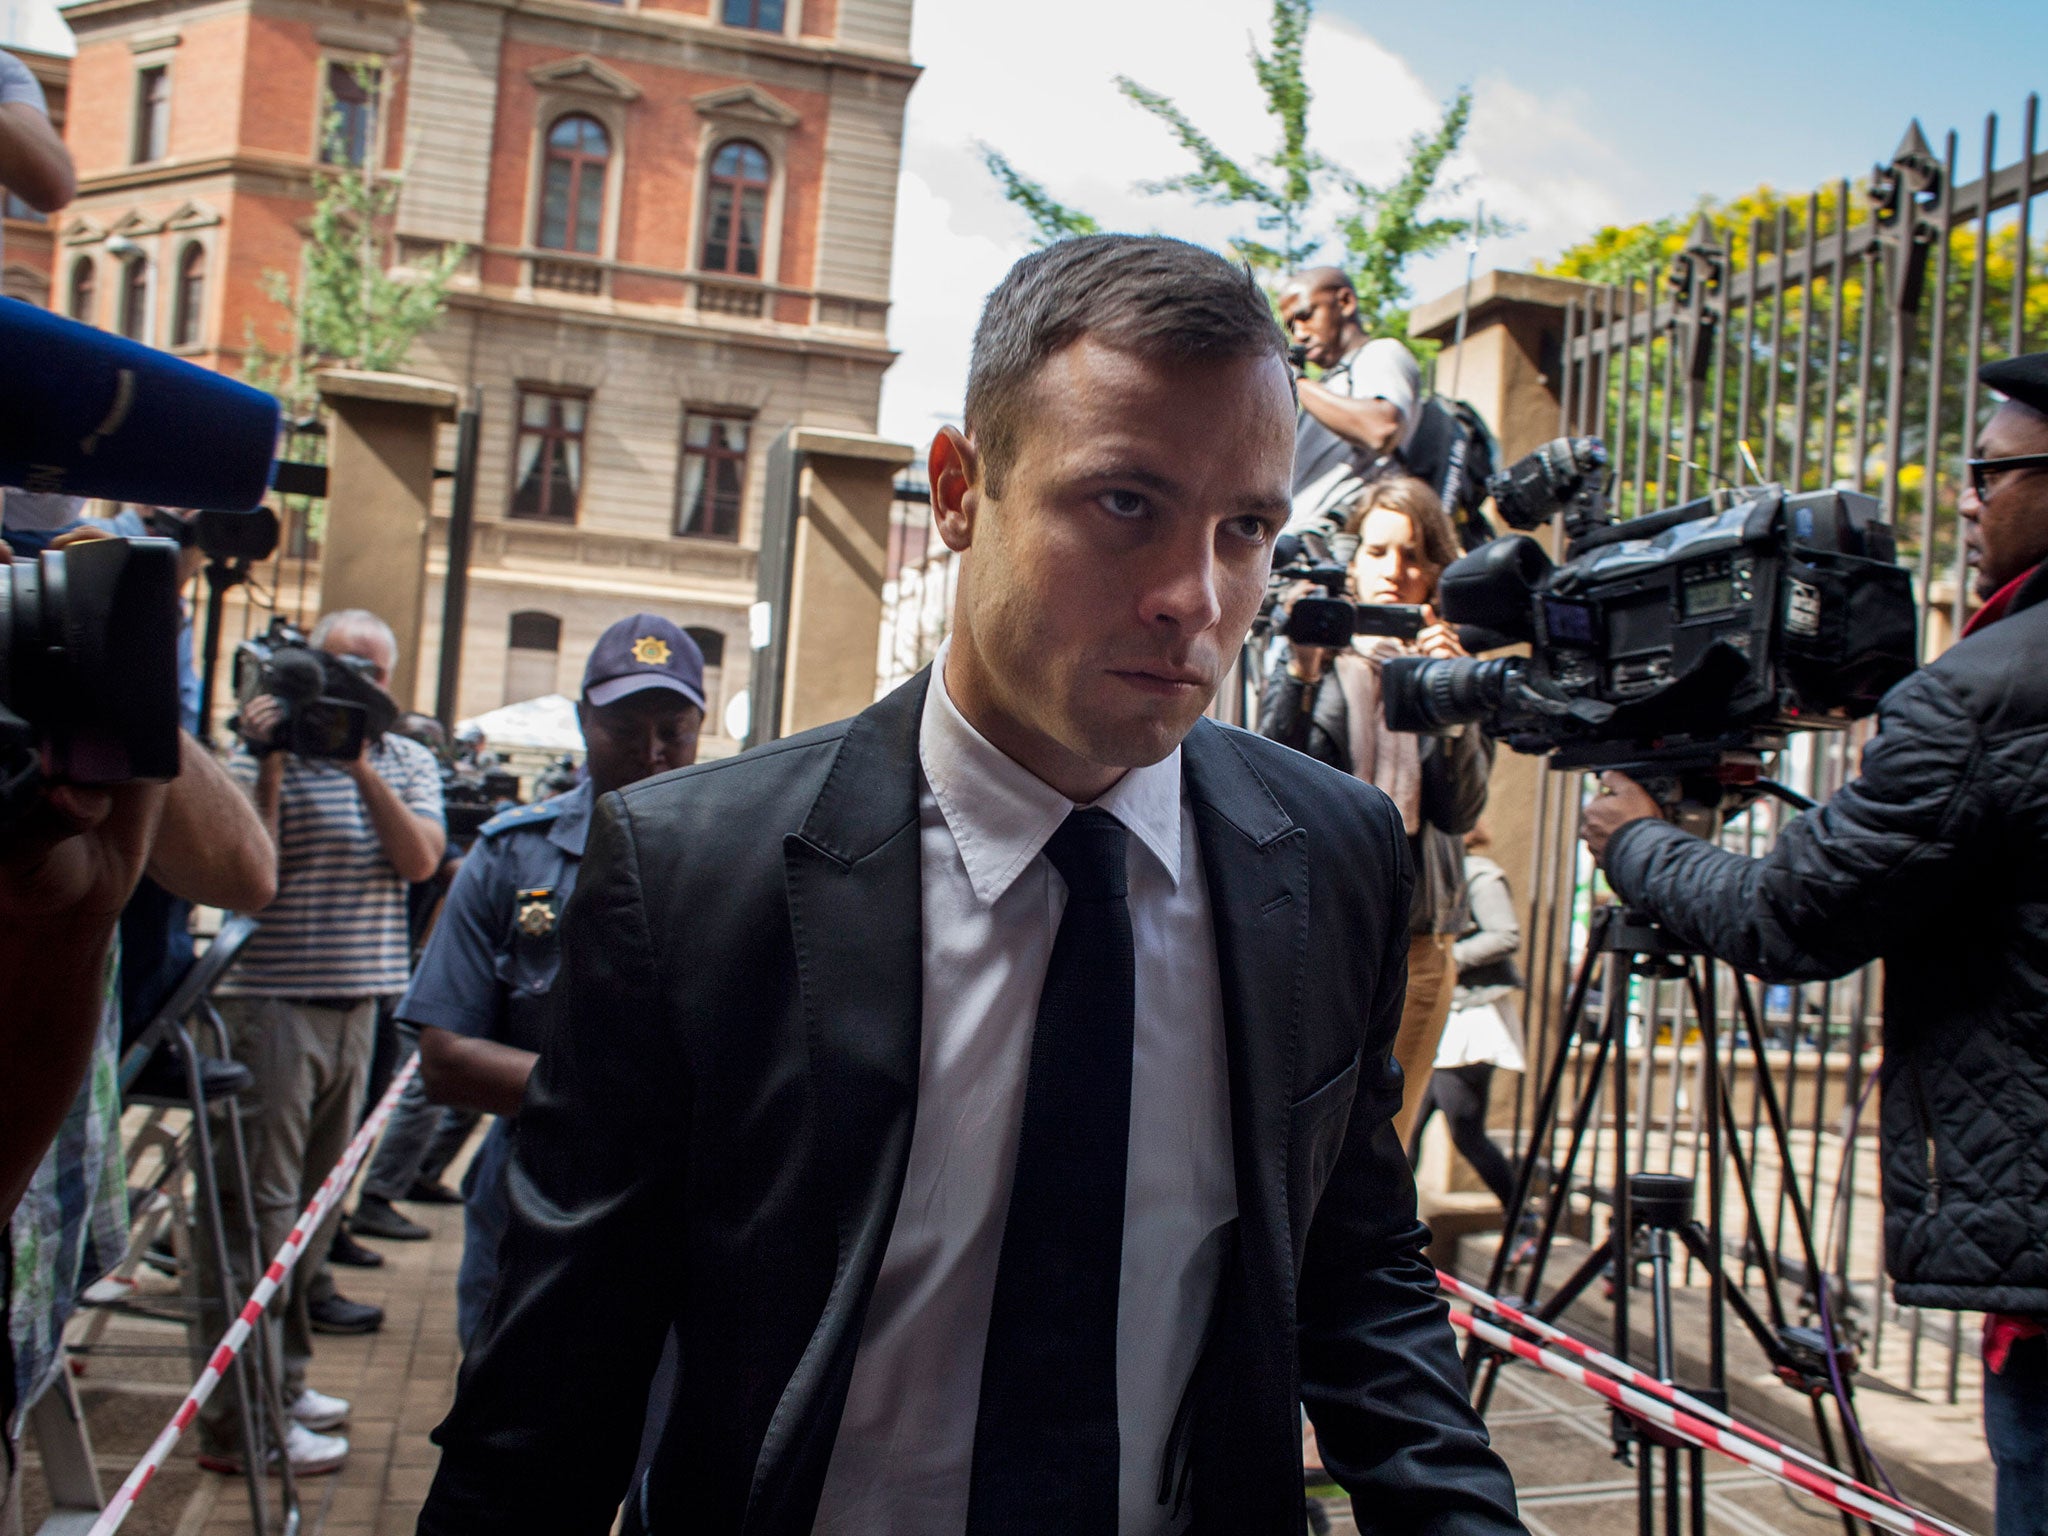 Oscar Pistorius arrives for the fourth day of sentencing at North Gauteng High Court on October 16, 2014 in Pretoria, South Africa.